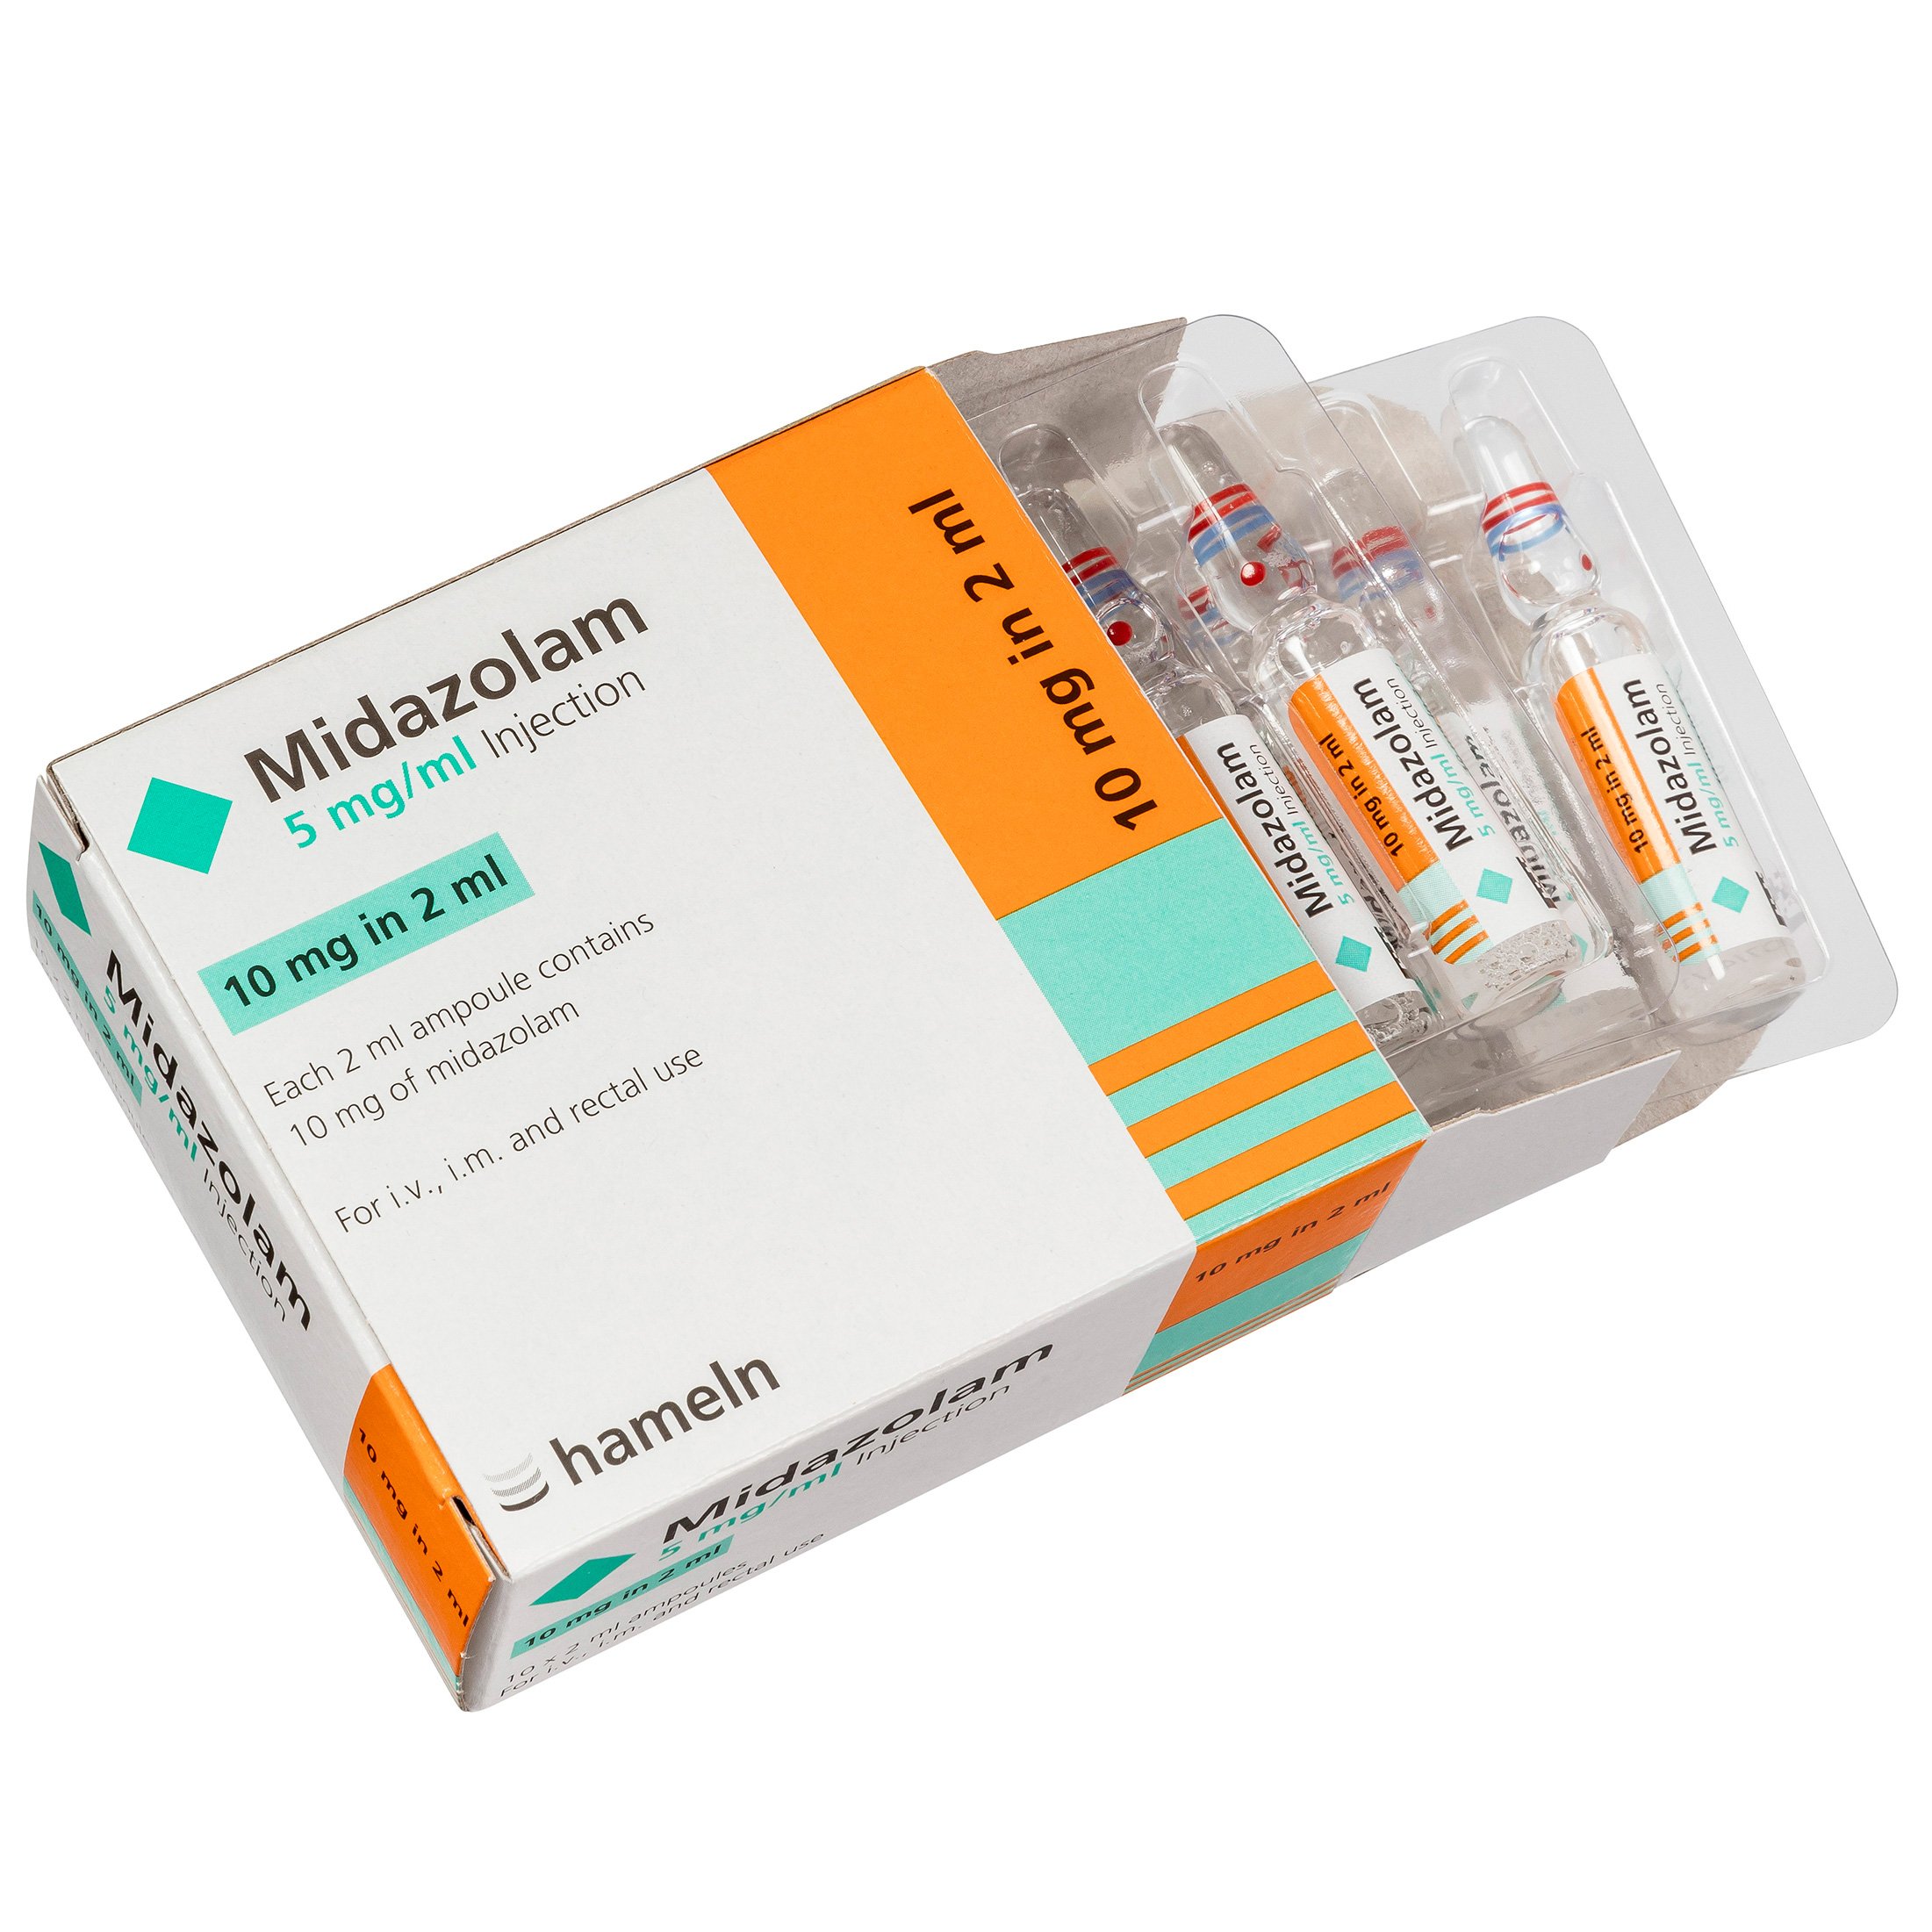 Midazolam 5mg/ml solution for injection, 2ml ampoules 